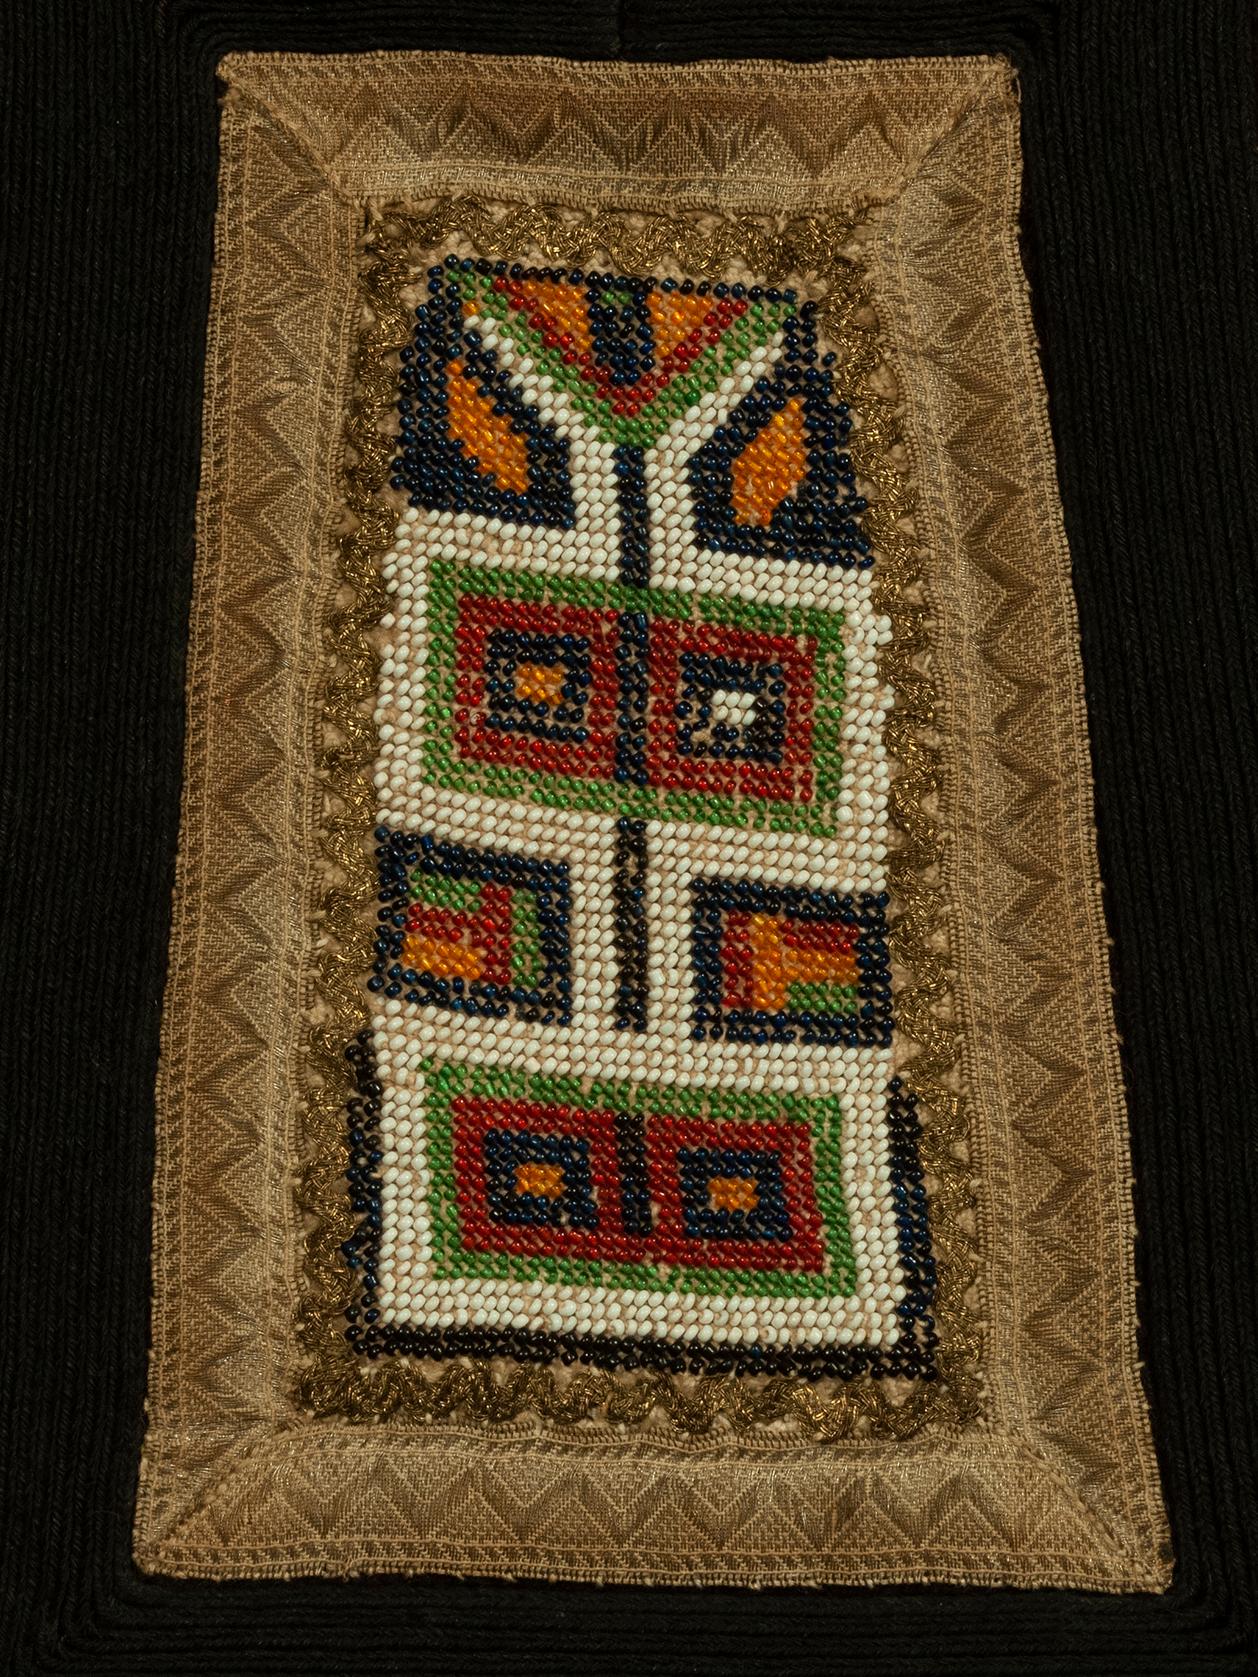 Woman’s apron
Sarakatsani culture, Greece
Wool glass beads,cotton, silk
Early 20th century
16.5 by 15 inches (42 by 38 cm)

An apron, podia, traditionally worn by married women of the Sarakatsani, a formerly nomadic tribe of northern Greece.  The